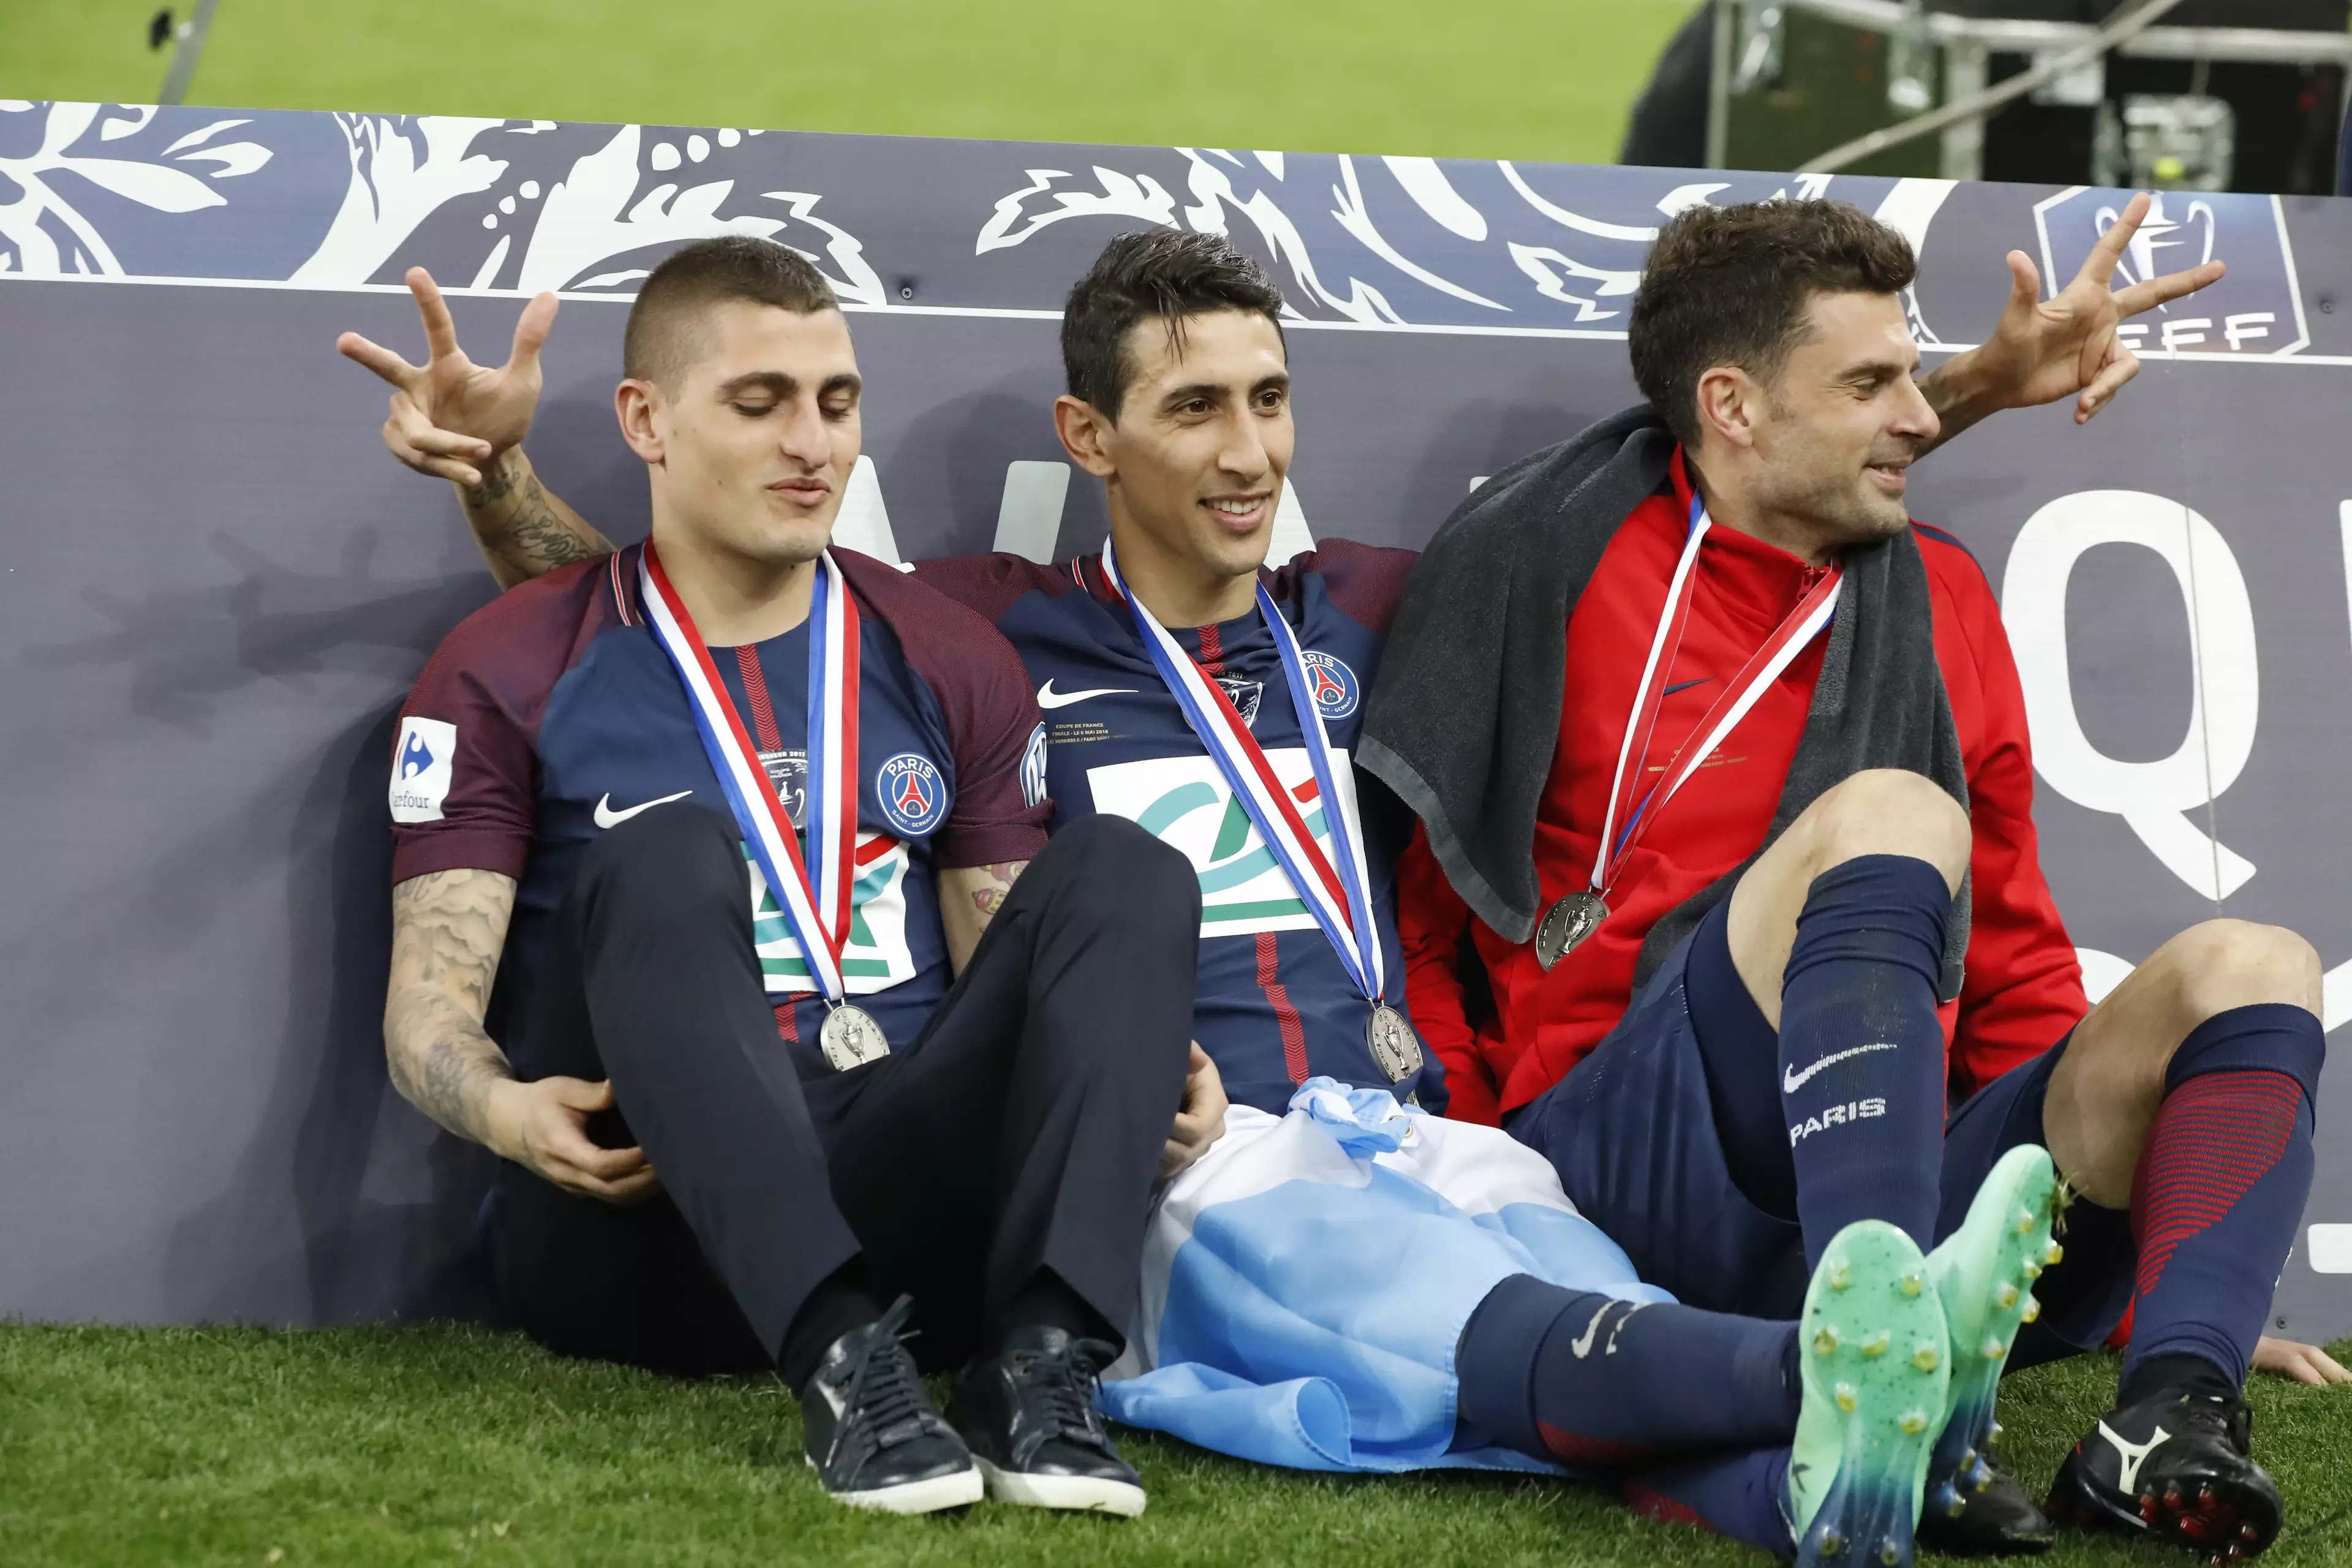 Could Verratti and Di Maria (left and centre) move to Juve together? Image: PA Images